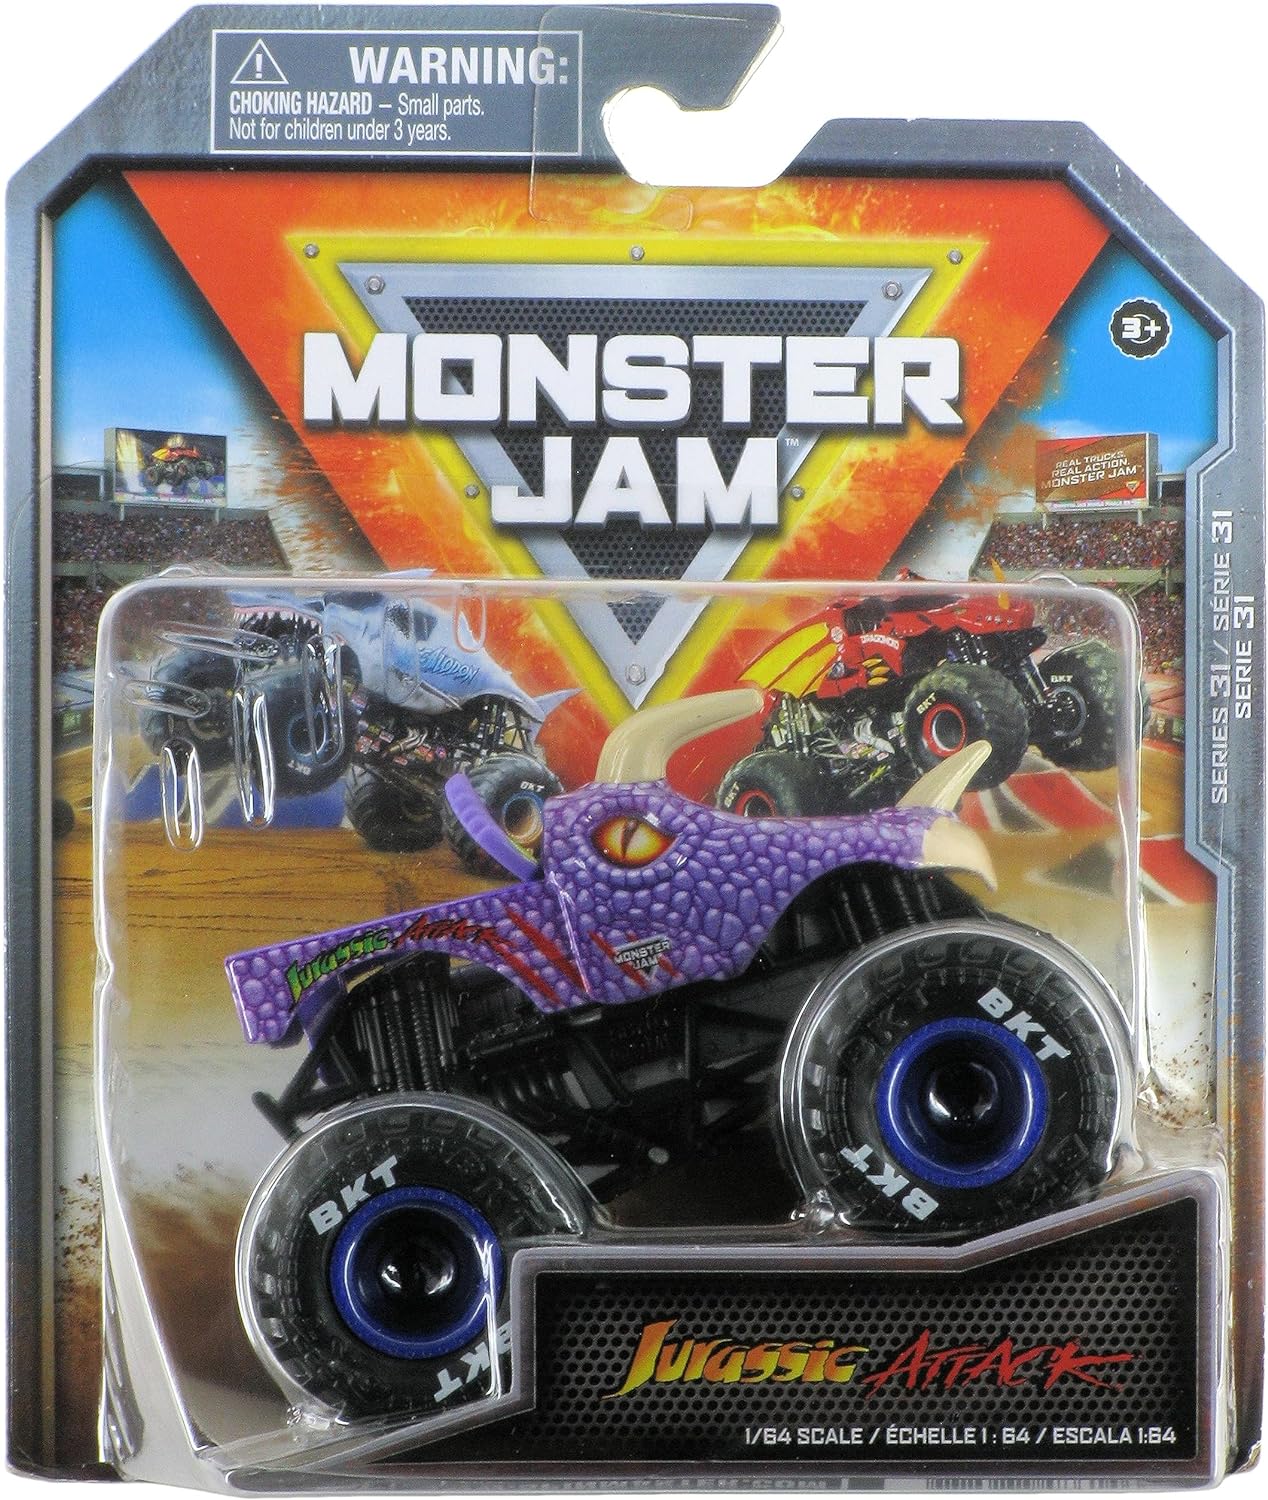  Monster Jam, Official Megalodon Monster Truck, Collector  Die-Cast Vehicle, 1:24 Scale, Kids Toys for Boys Ages 3 and up : Toys &  Games